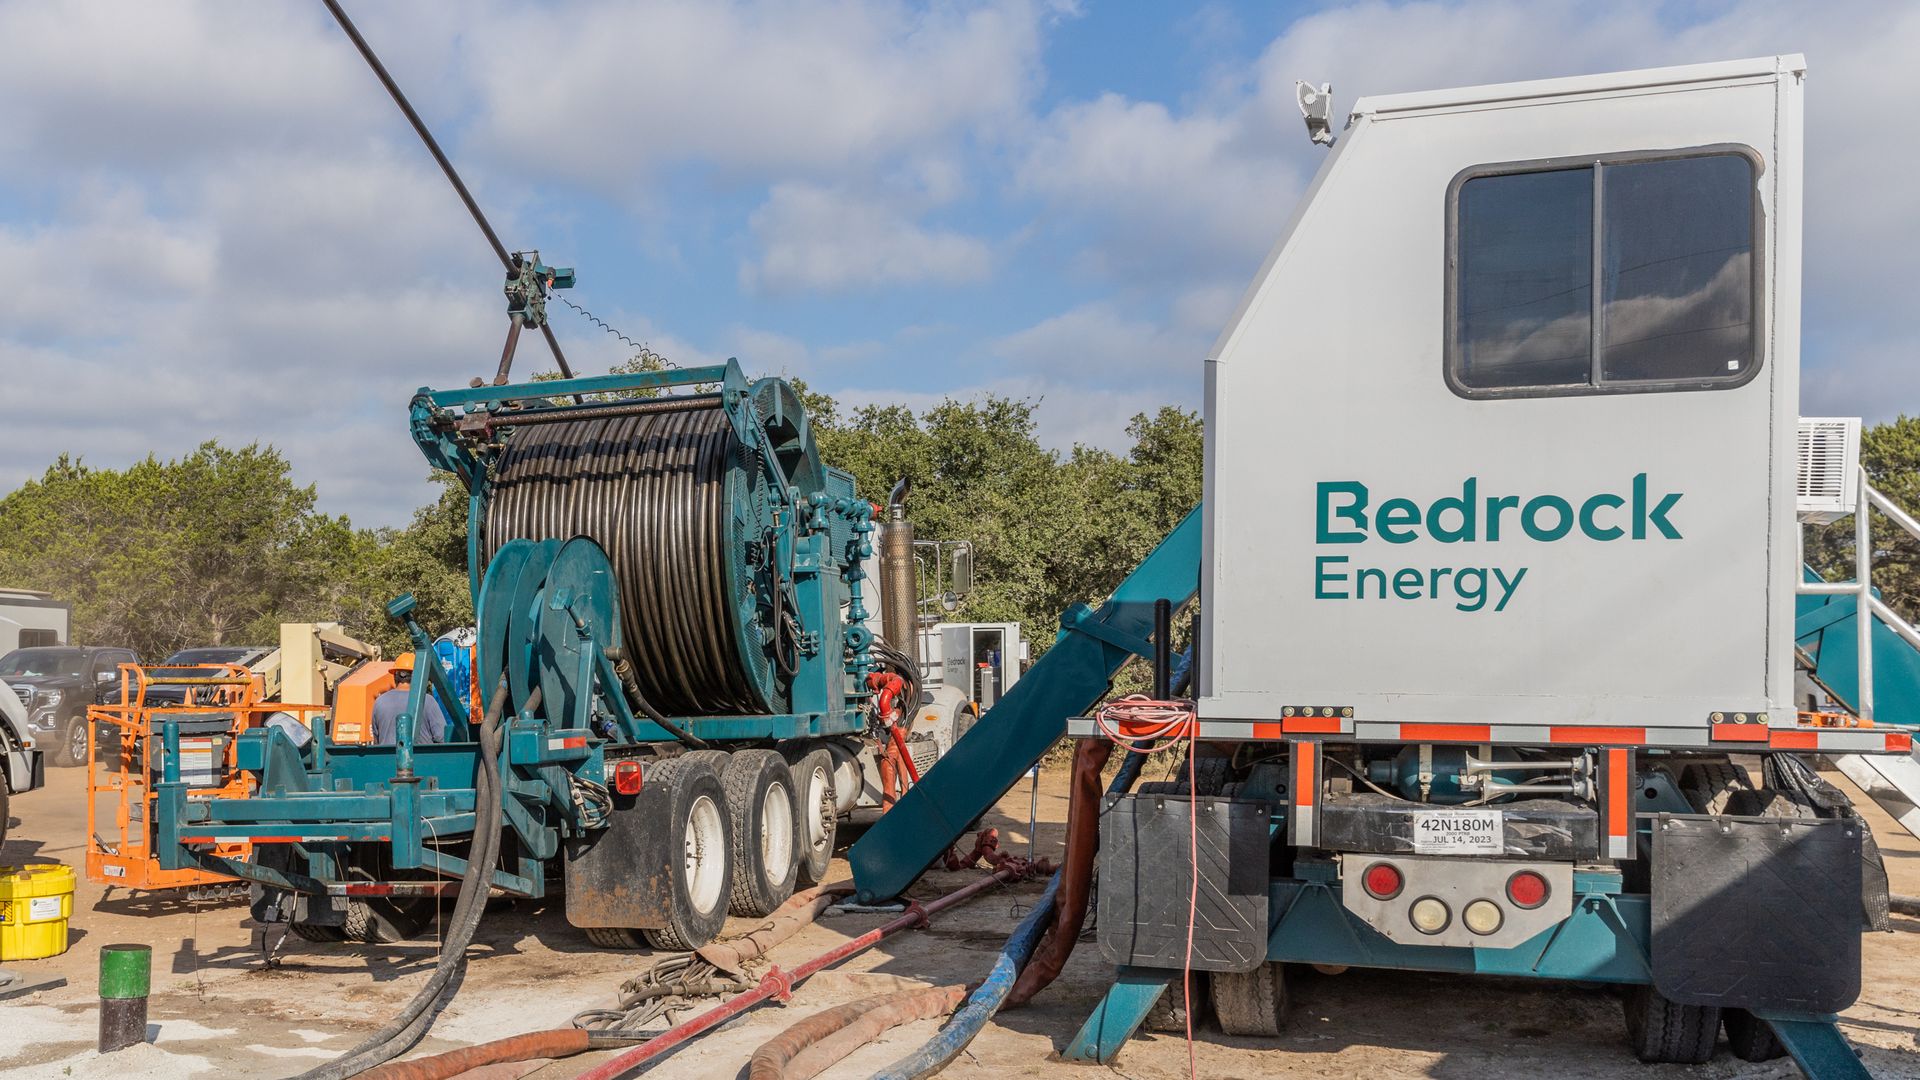 A photo of giant steel cable wrapped around a spool on the back of a green truck, next two another truck with what looks like a generator on the back.